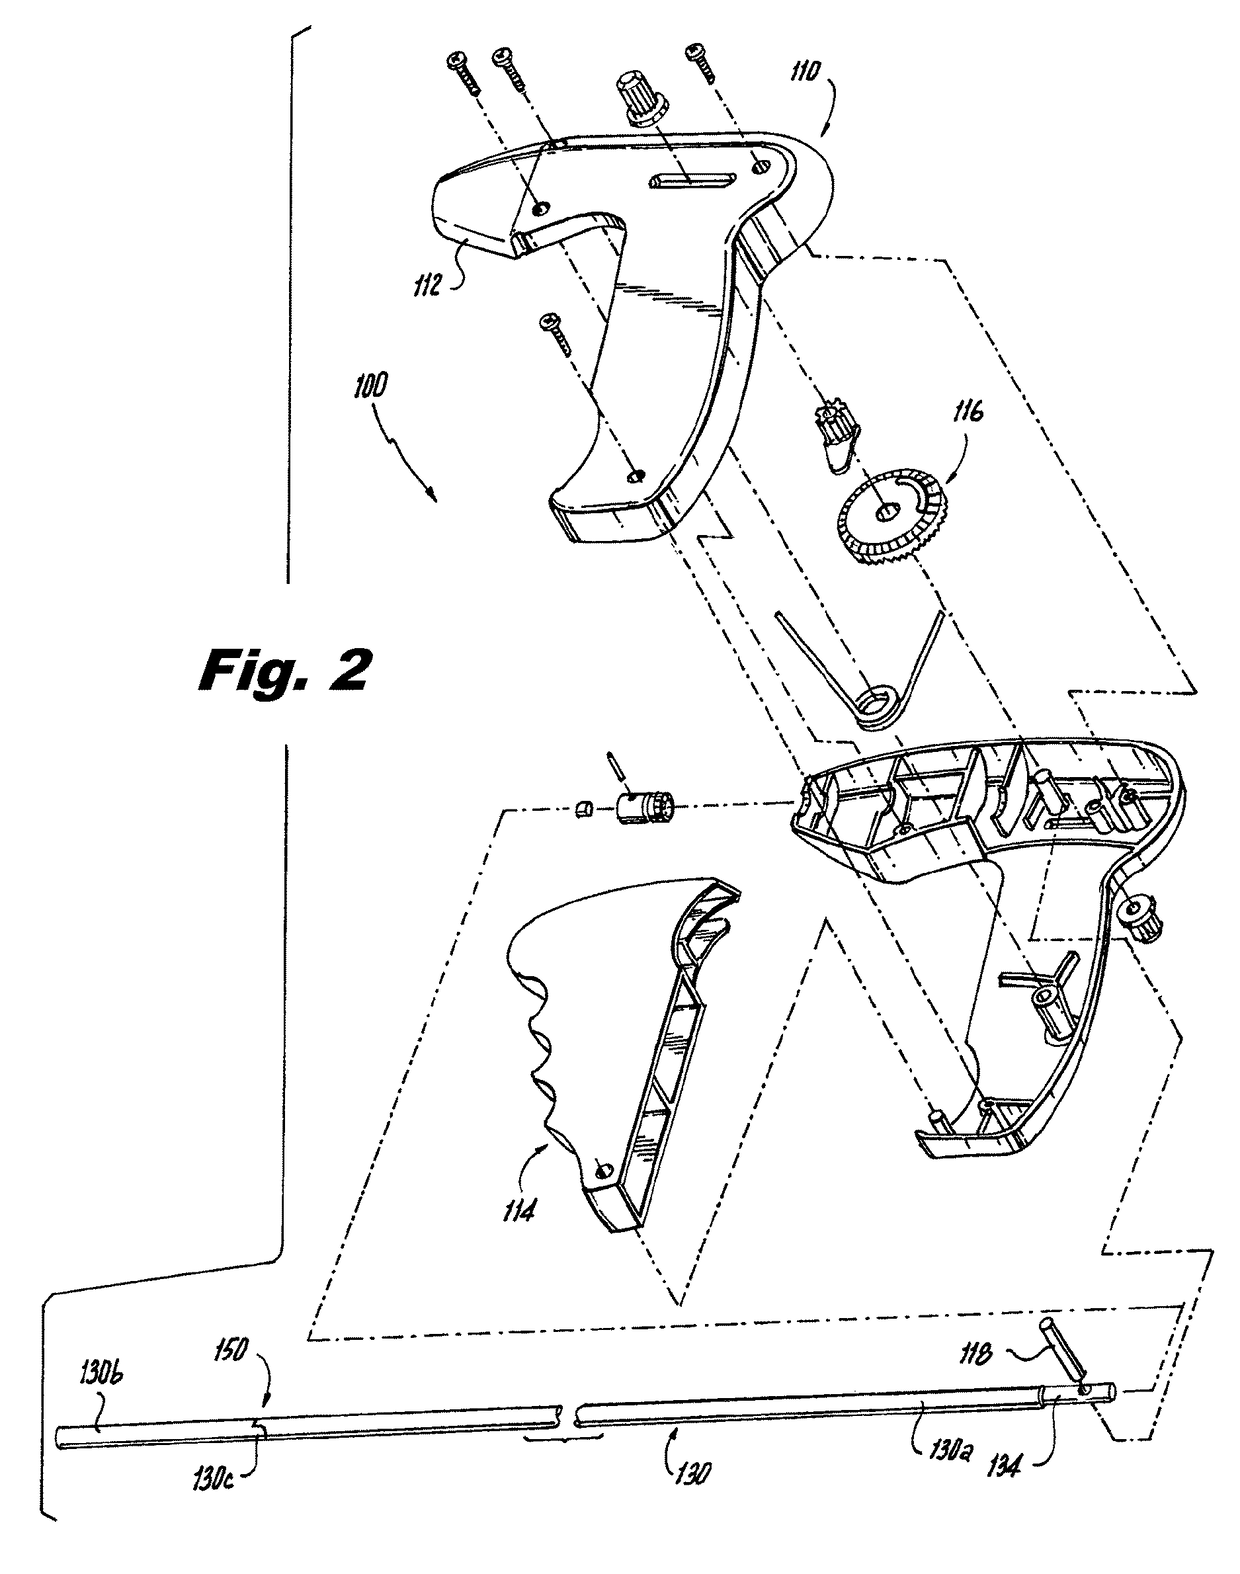 Articulation joint for apparatus for endoscopic procedures